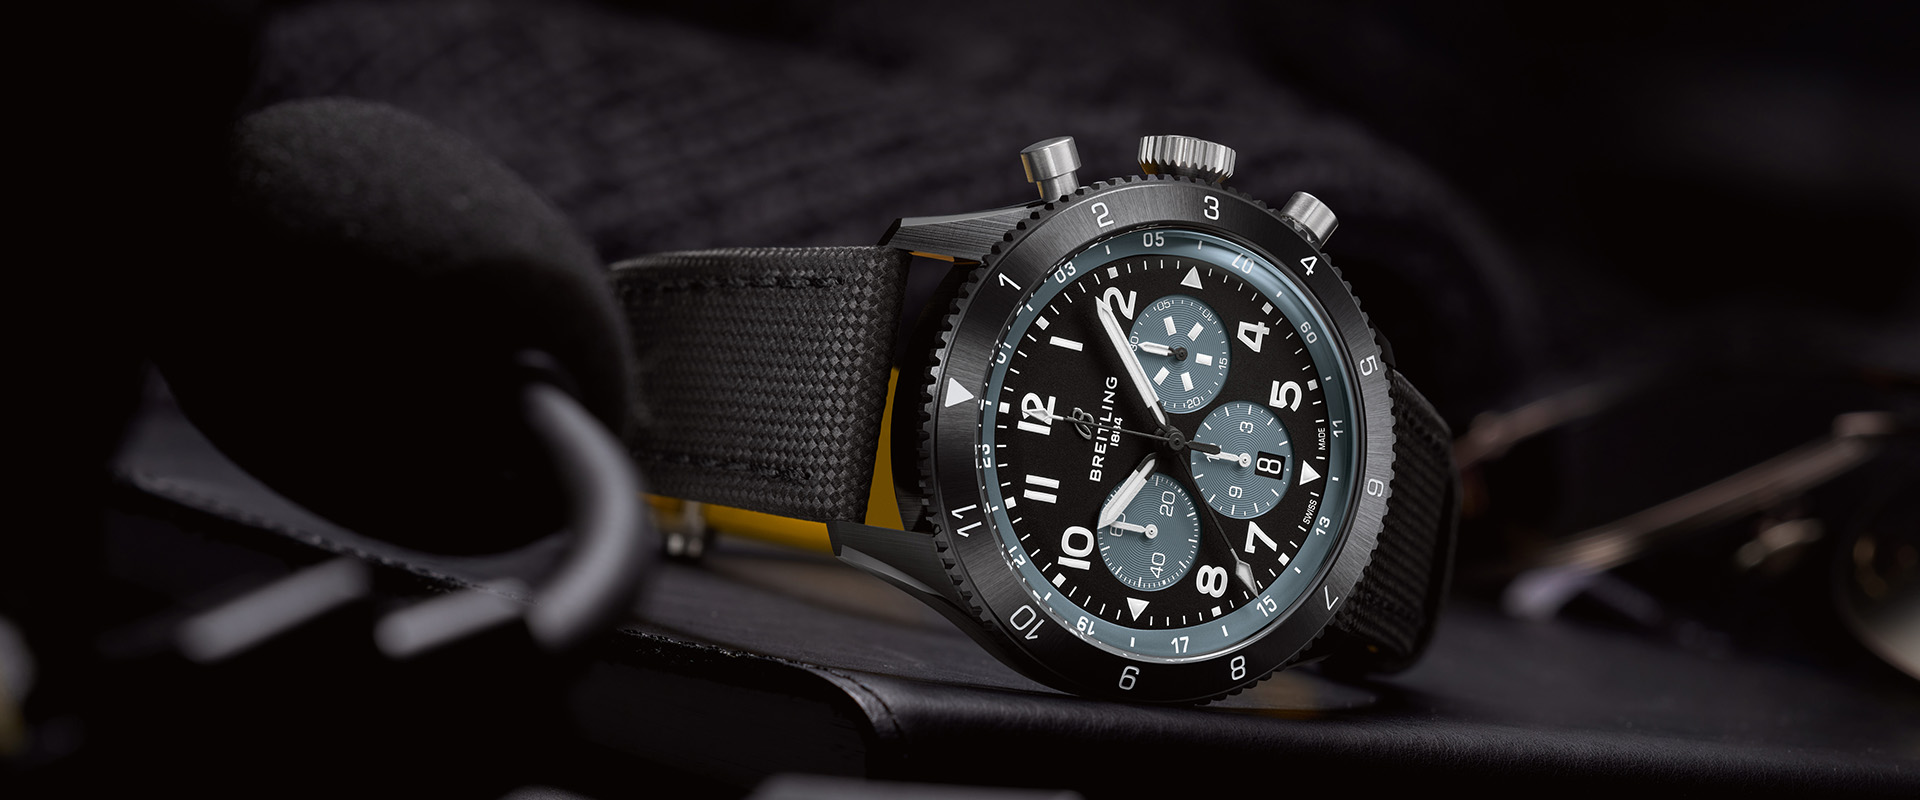 Breitling Watches For Professionals